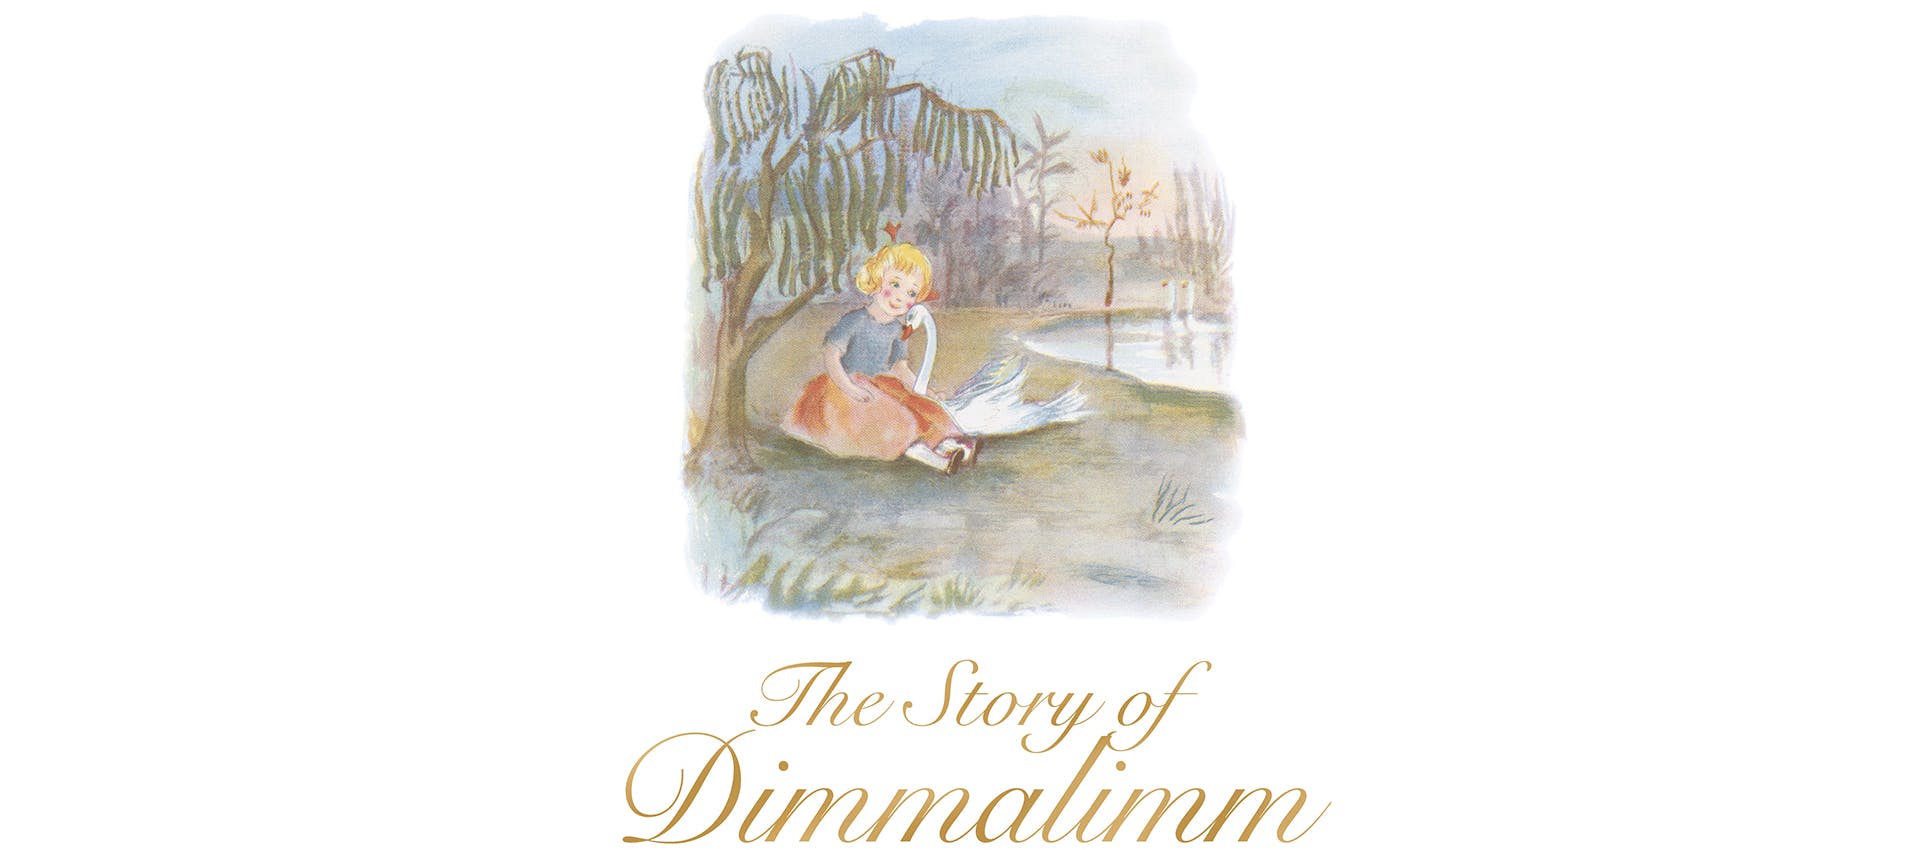 The cover of the story of Dimmalimm by Muggur